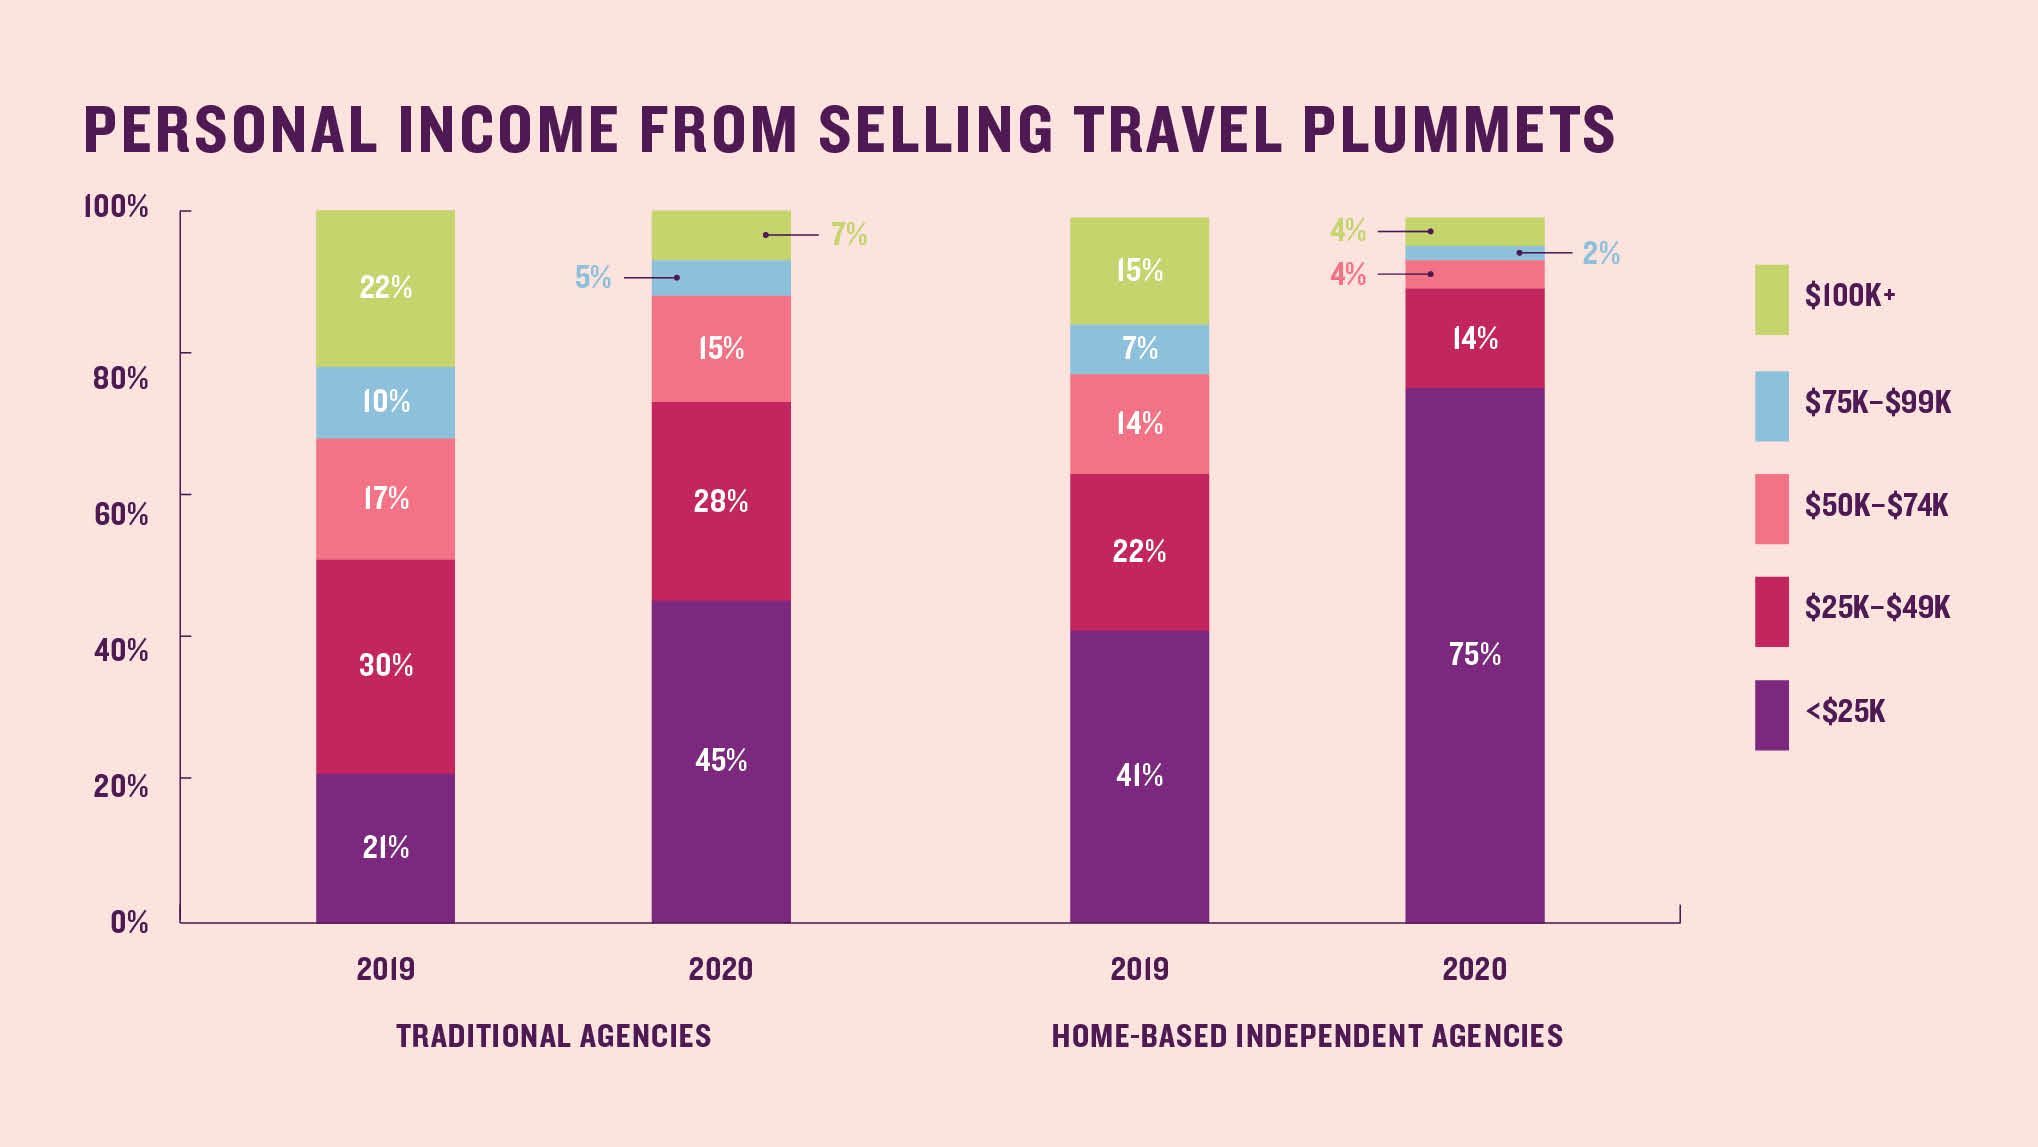 travel agency sources of income